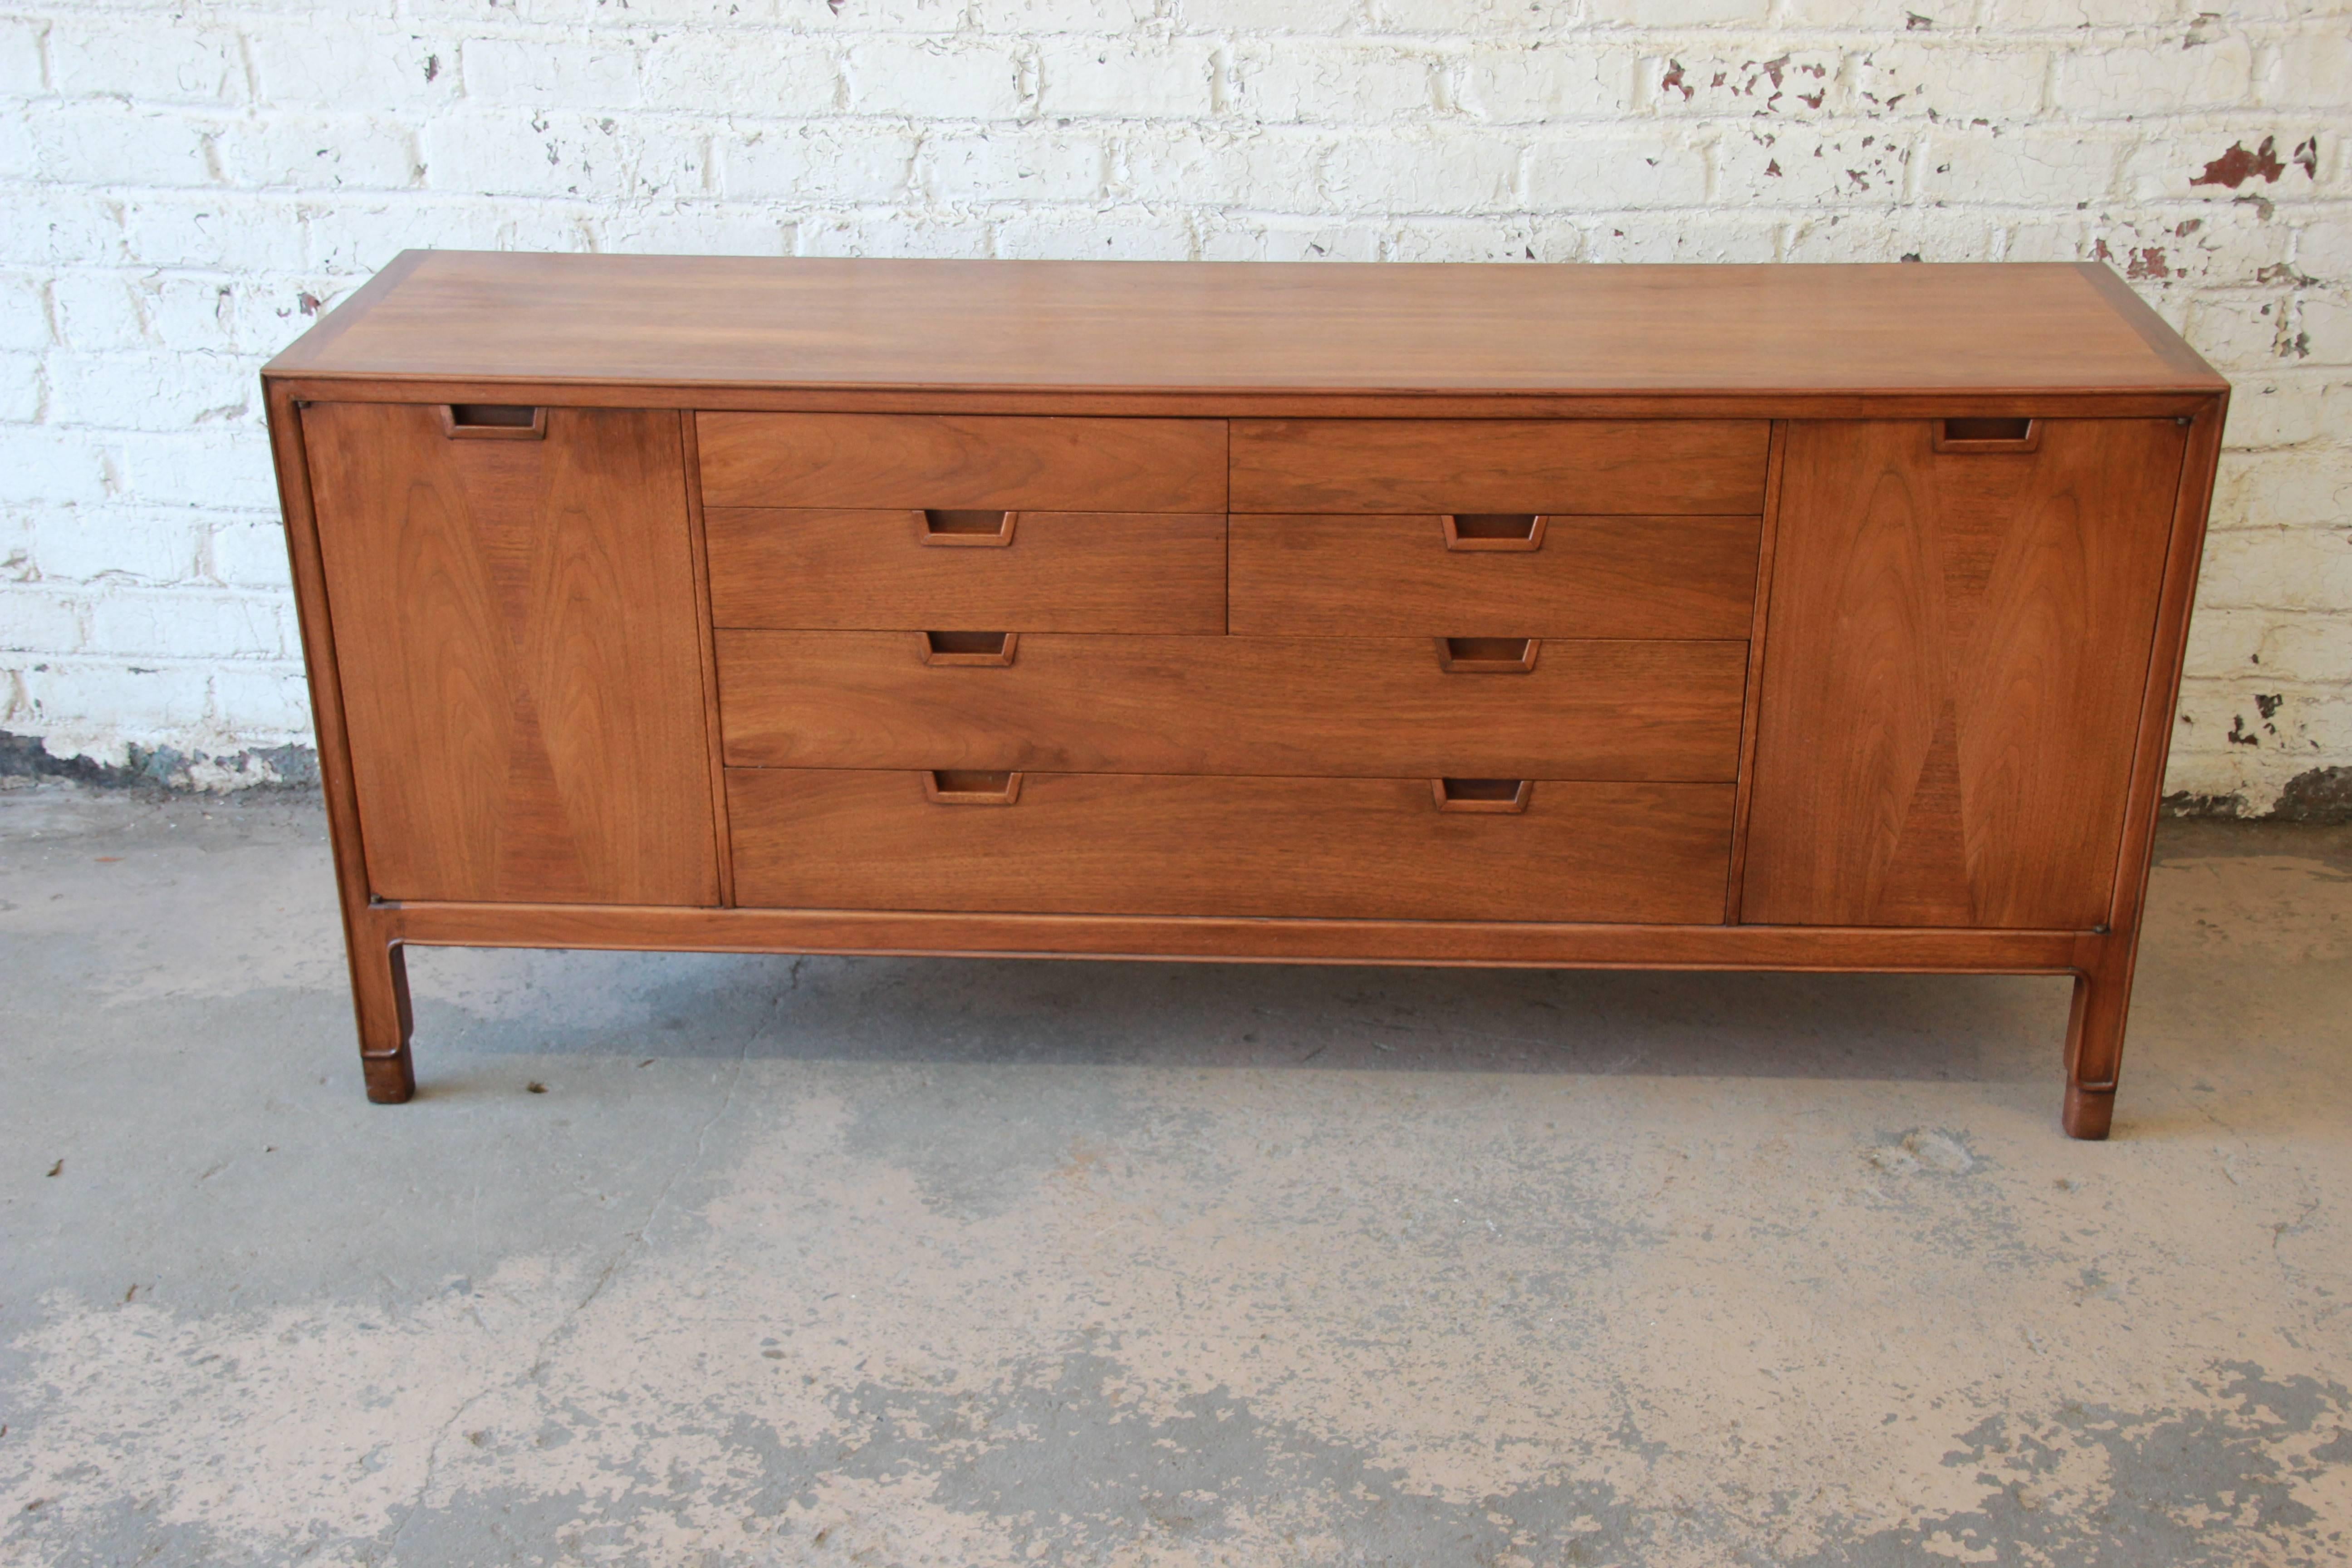 Offering a very nice unique fourteen drawer dresser or credenza by Mt. Airy. The dresser is apart of the Janus collection and is made from walnut with an inlaid wood design on the cabinet doors. The doors open each open up to four smooth sliding